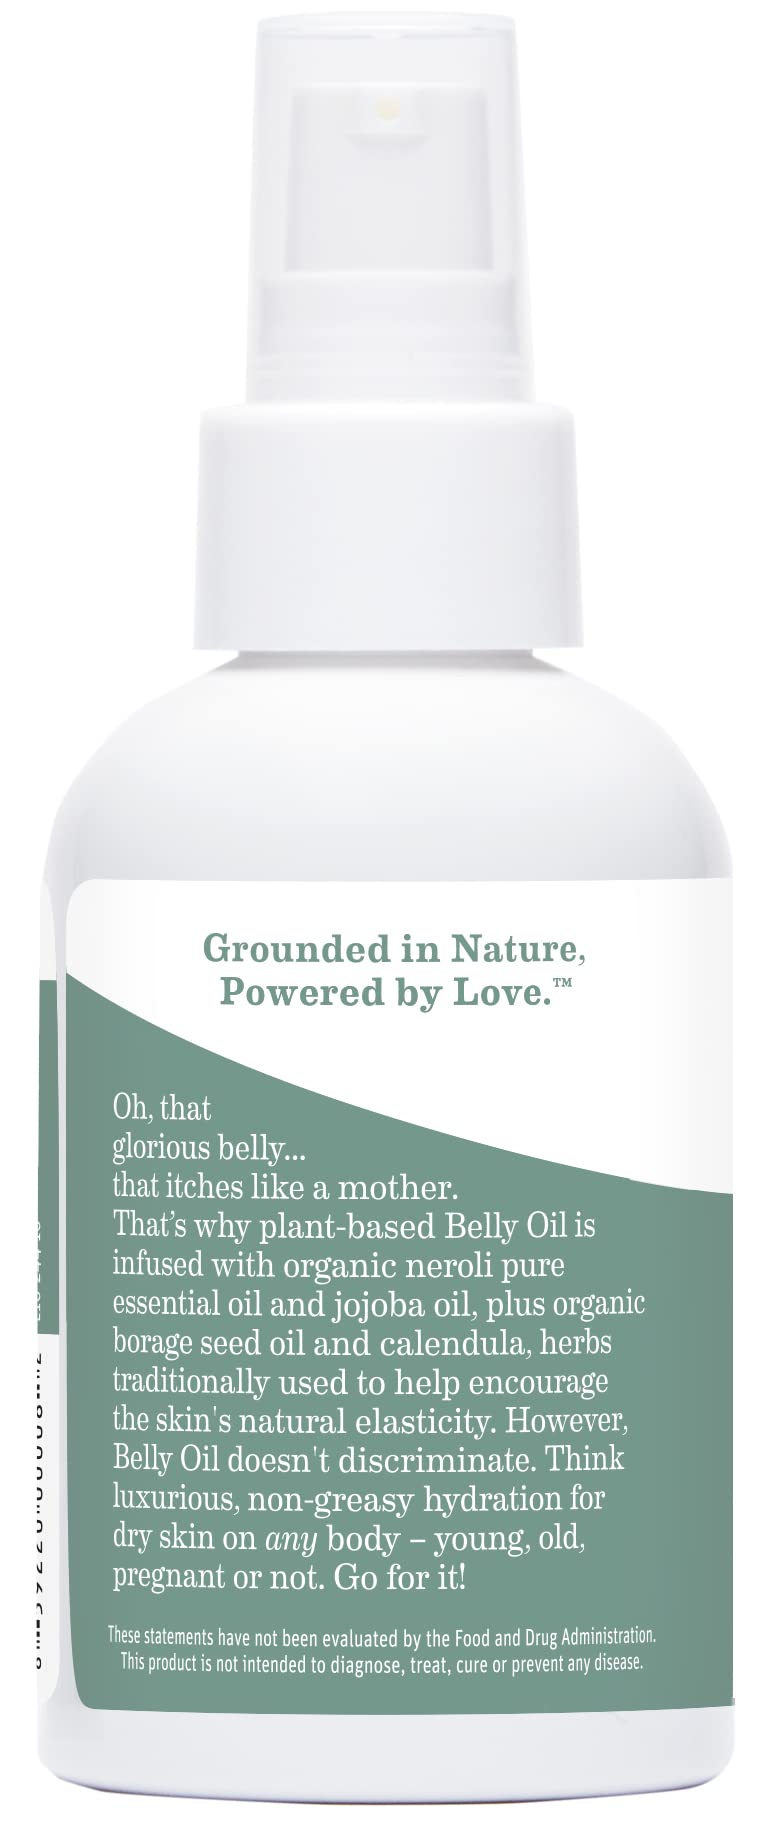 Earth Mama Belly Butter & Belly Oil Bundle for Dry, Stretching Skin | Moisturize + Encourage Skin's Natural Elasticity During Pregnancy & Beyond, 8-Fluid Ounce & 4-Fluid Ounce